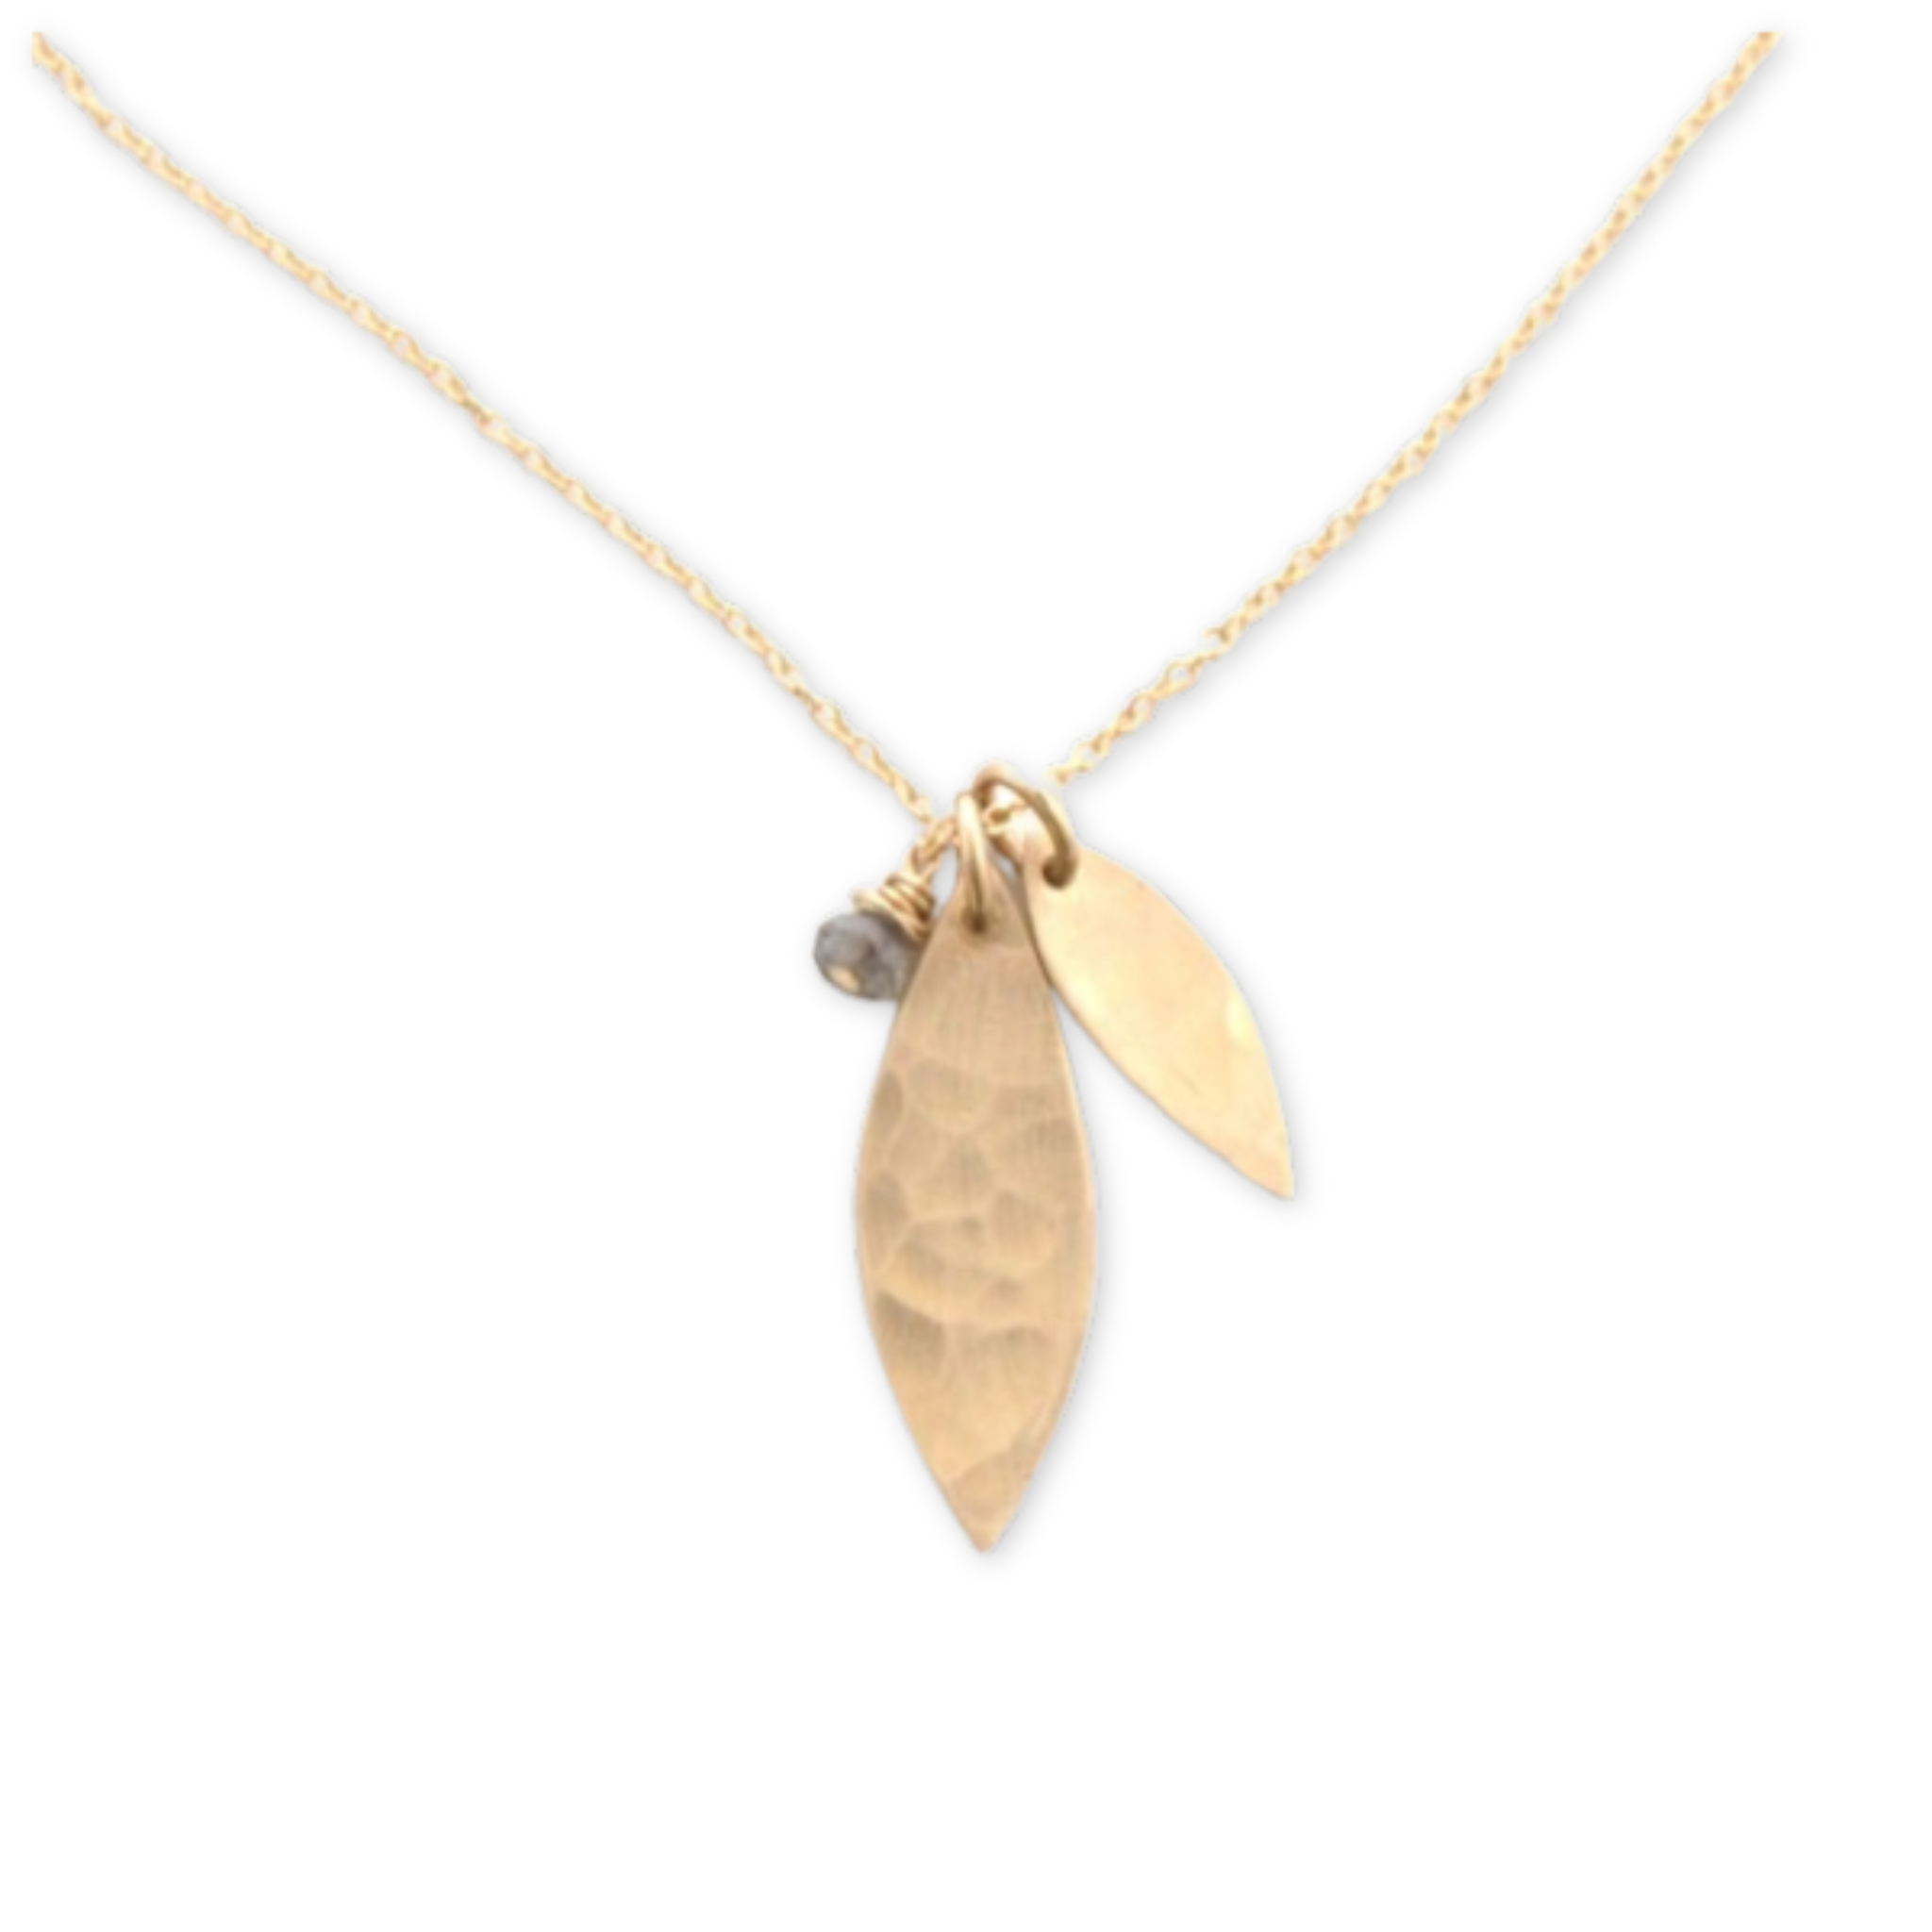 dainty chain necklace with two hammered leaf inspired charms and a small stone